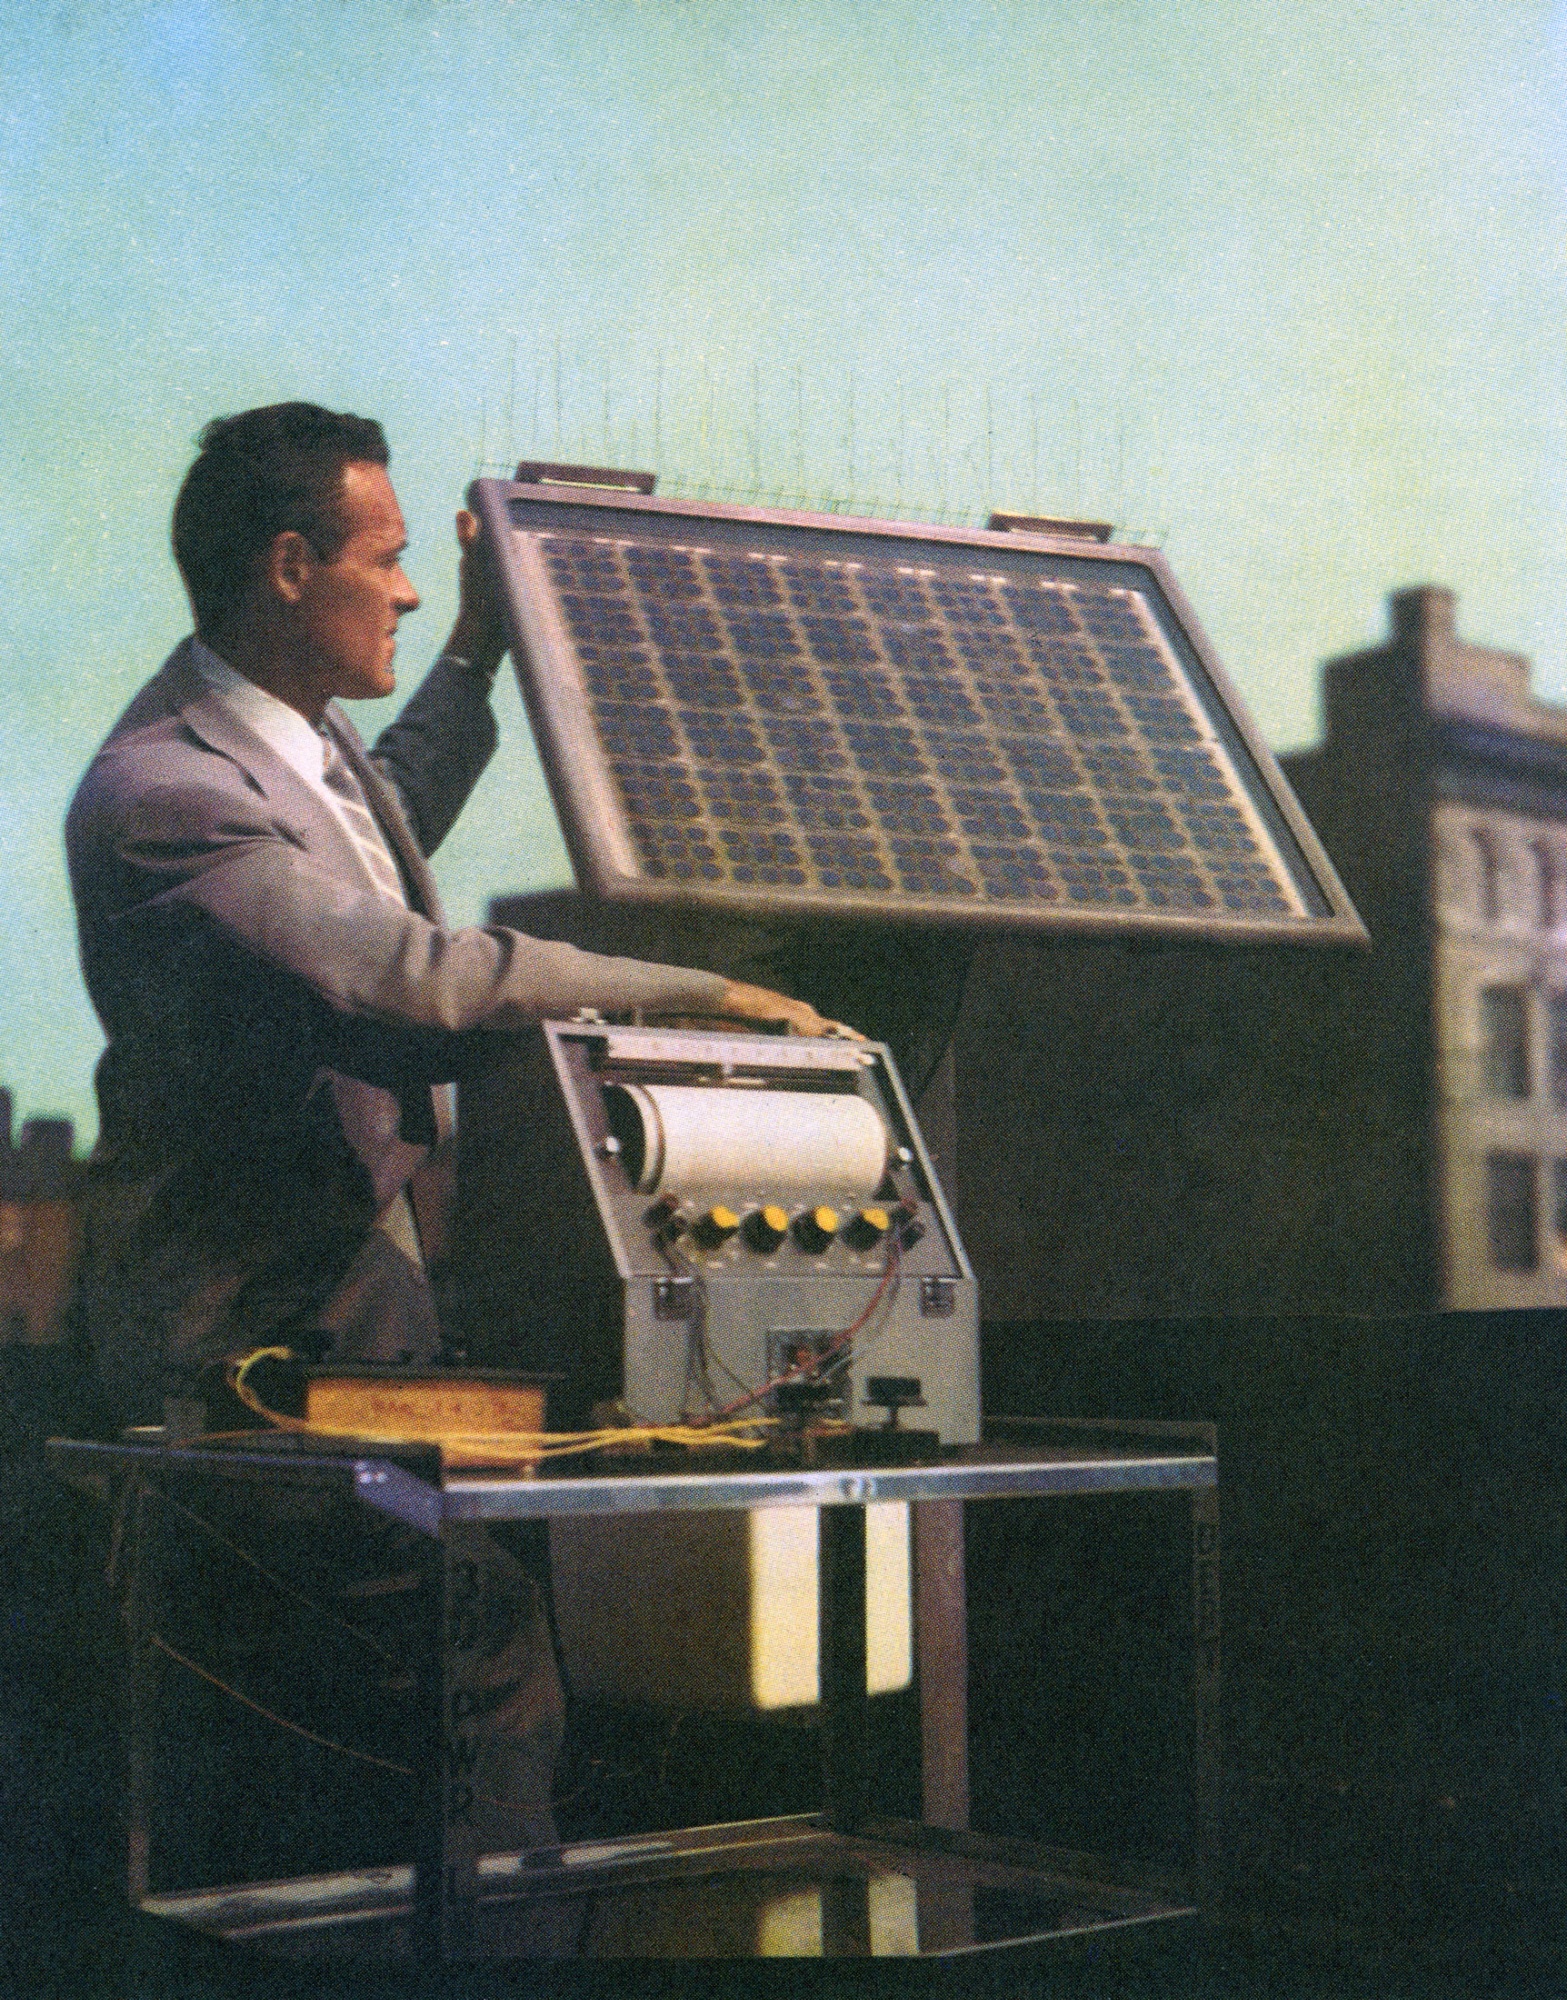 Installation of the first successful solar panel and solar battery, for the Georgia telephone carrier Americus, on&nbsp;Oct. 4, 1955.&nbsp;